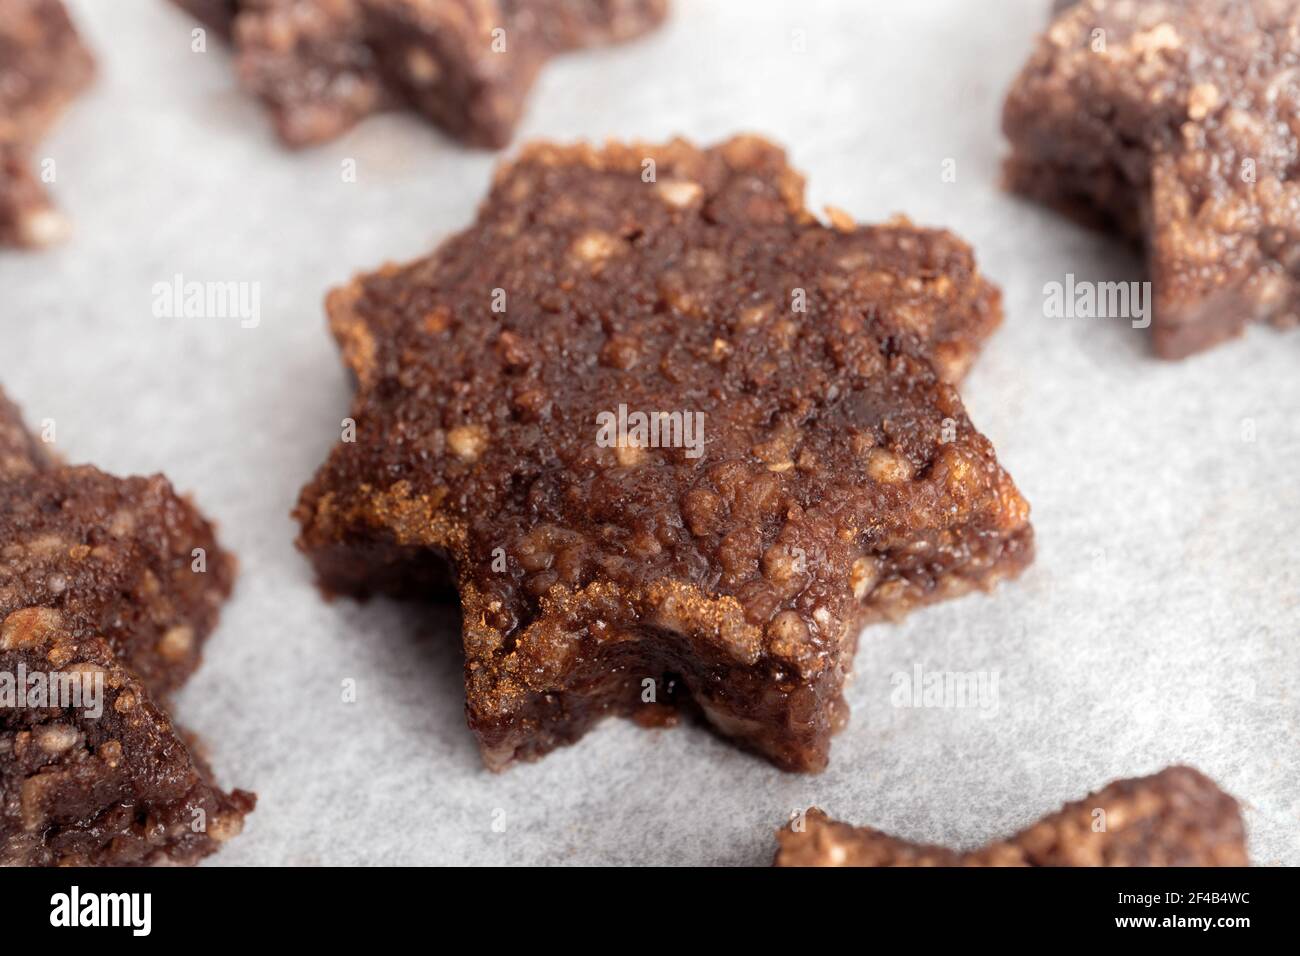 Gluten free almond flour and chocolate cookie in shape of a star with sugar cinnamon rim, ready to be baked. Swiss recipe 'Basler Brunsli'. GF Christm Stock Photo